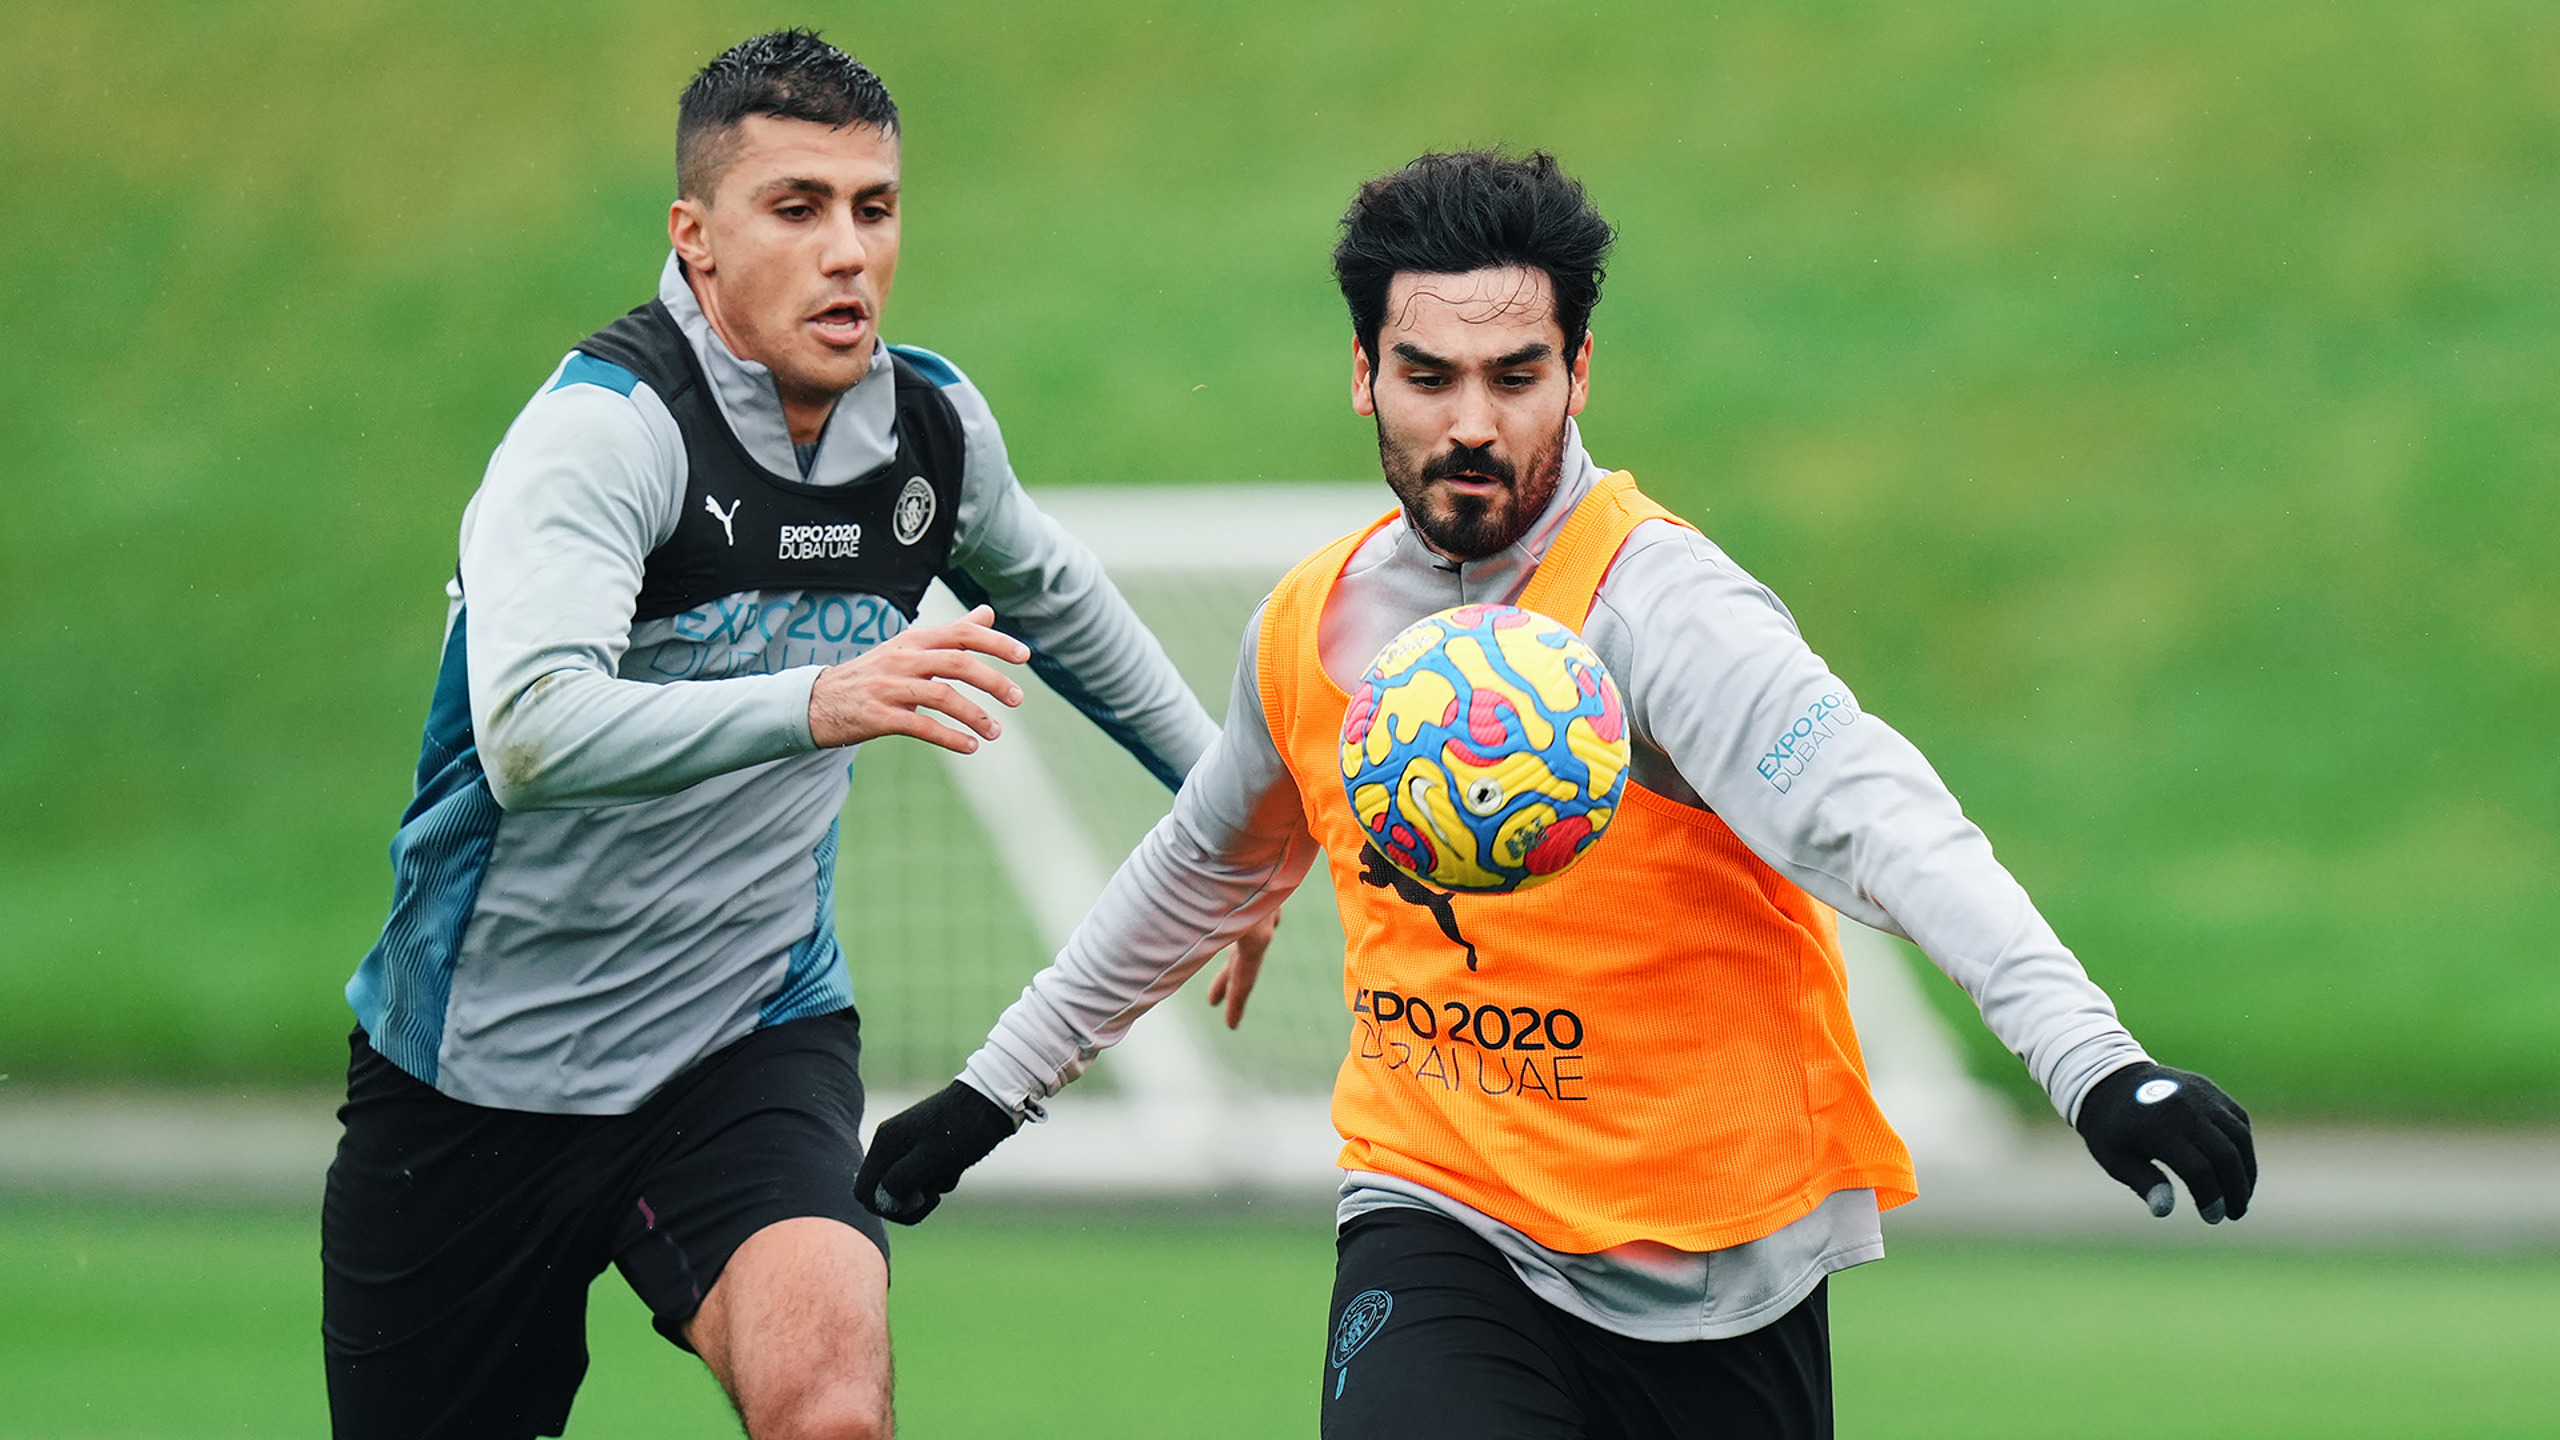 Training: Back to the grind after the international break